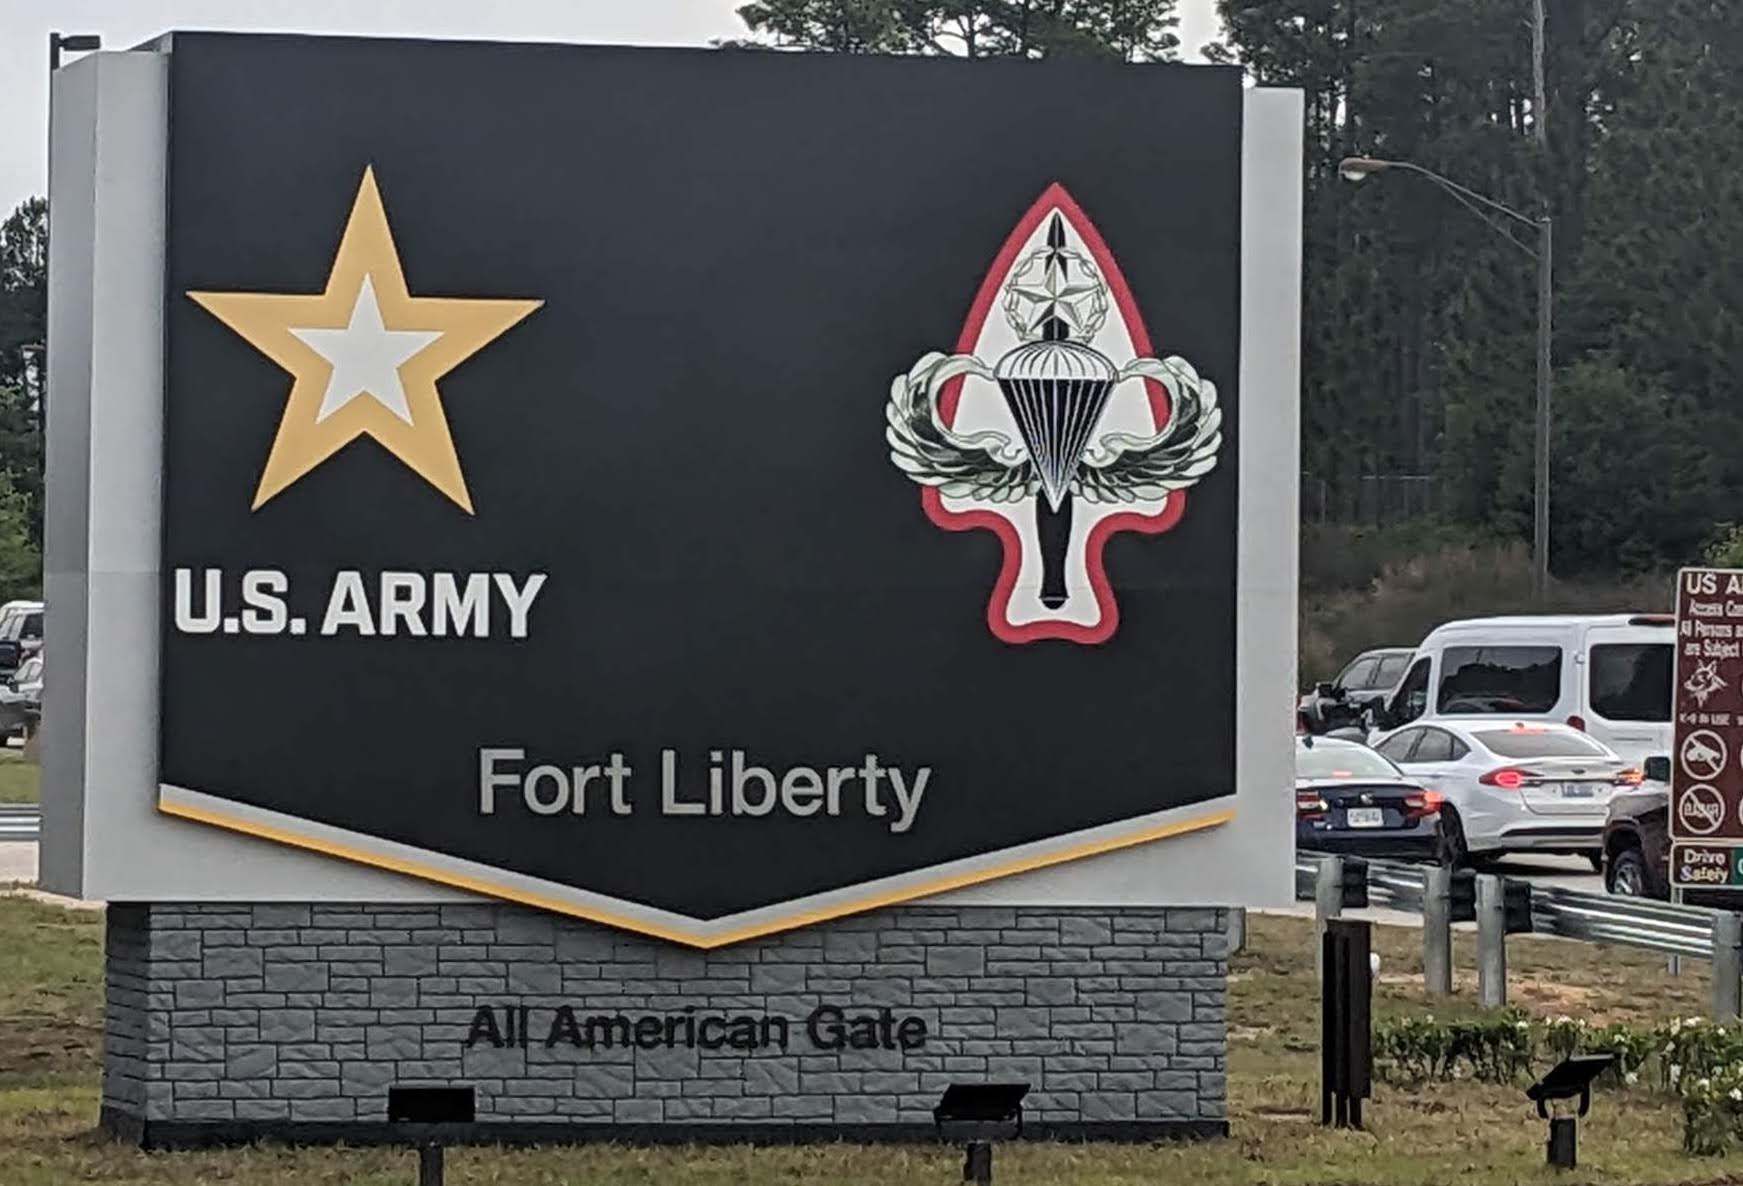 Fort Bragg's new name, Liberty, was a Gold Star mom's idea